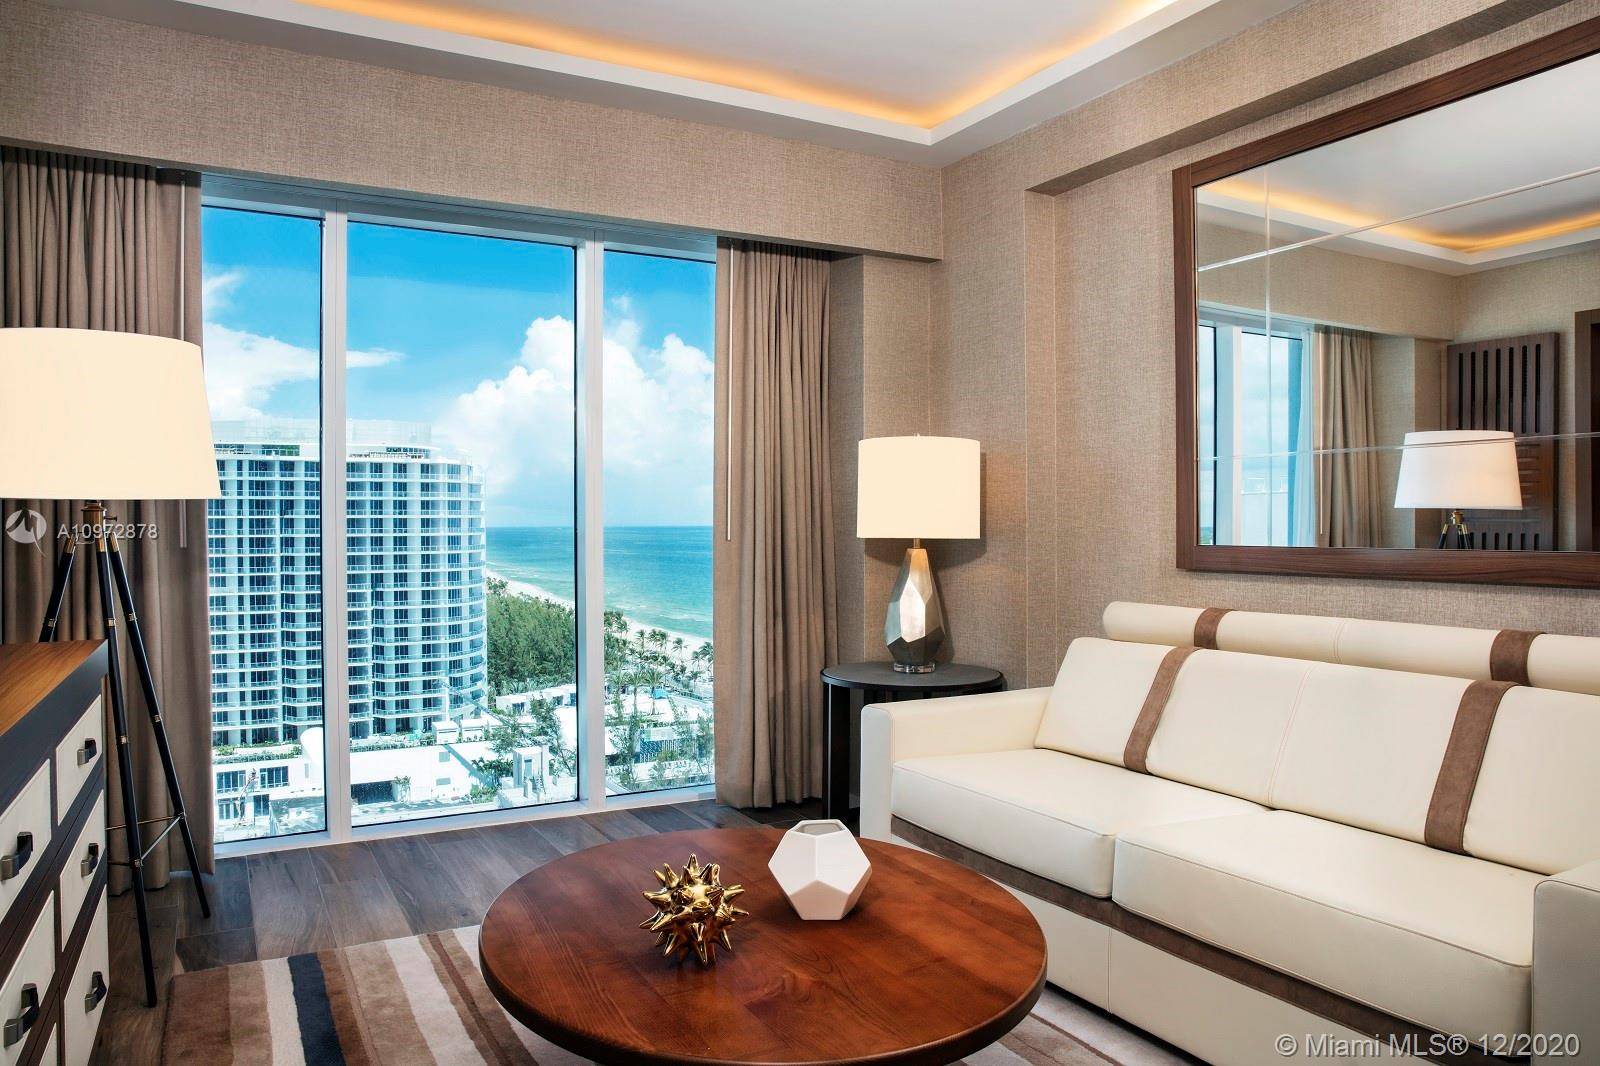 This 1 bedroom is a completely furnished, finished and turn key residence at The Ocean Resort Residences Conrad Fort Lauderdale Beach !